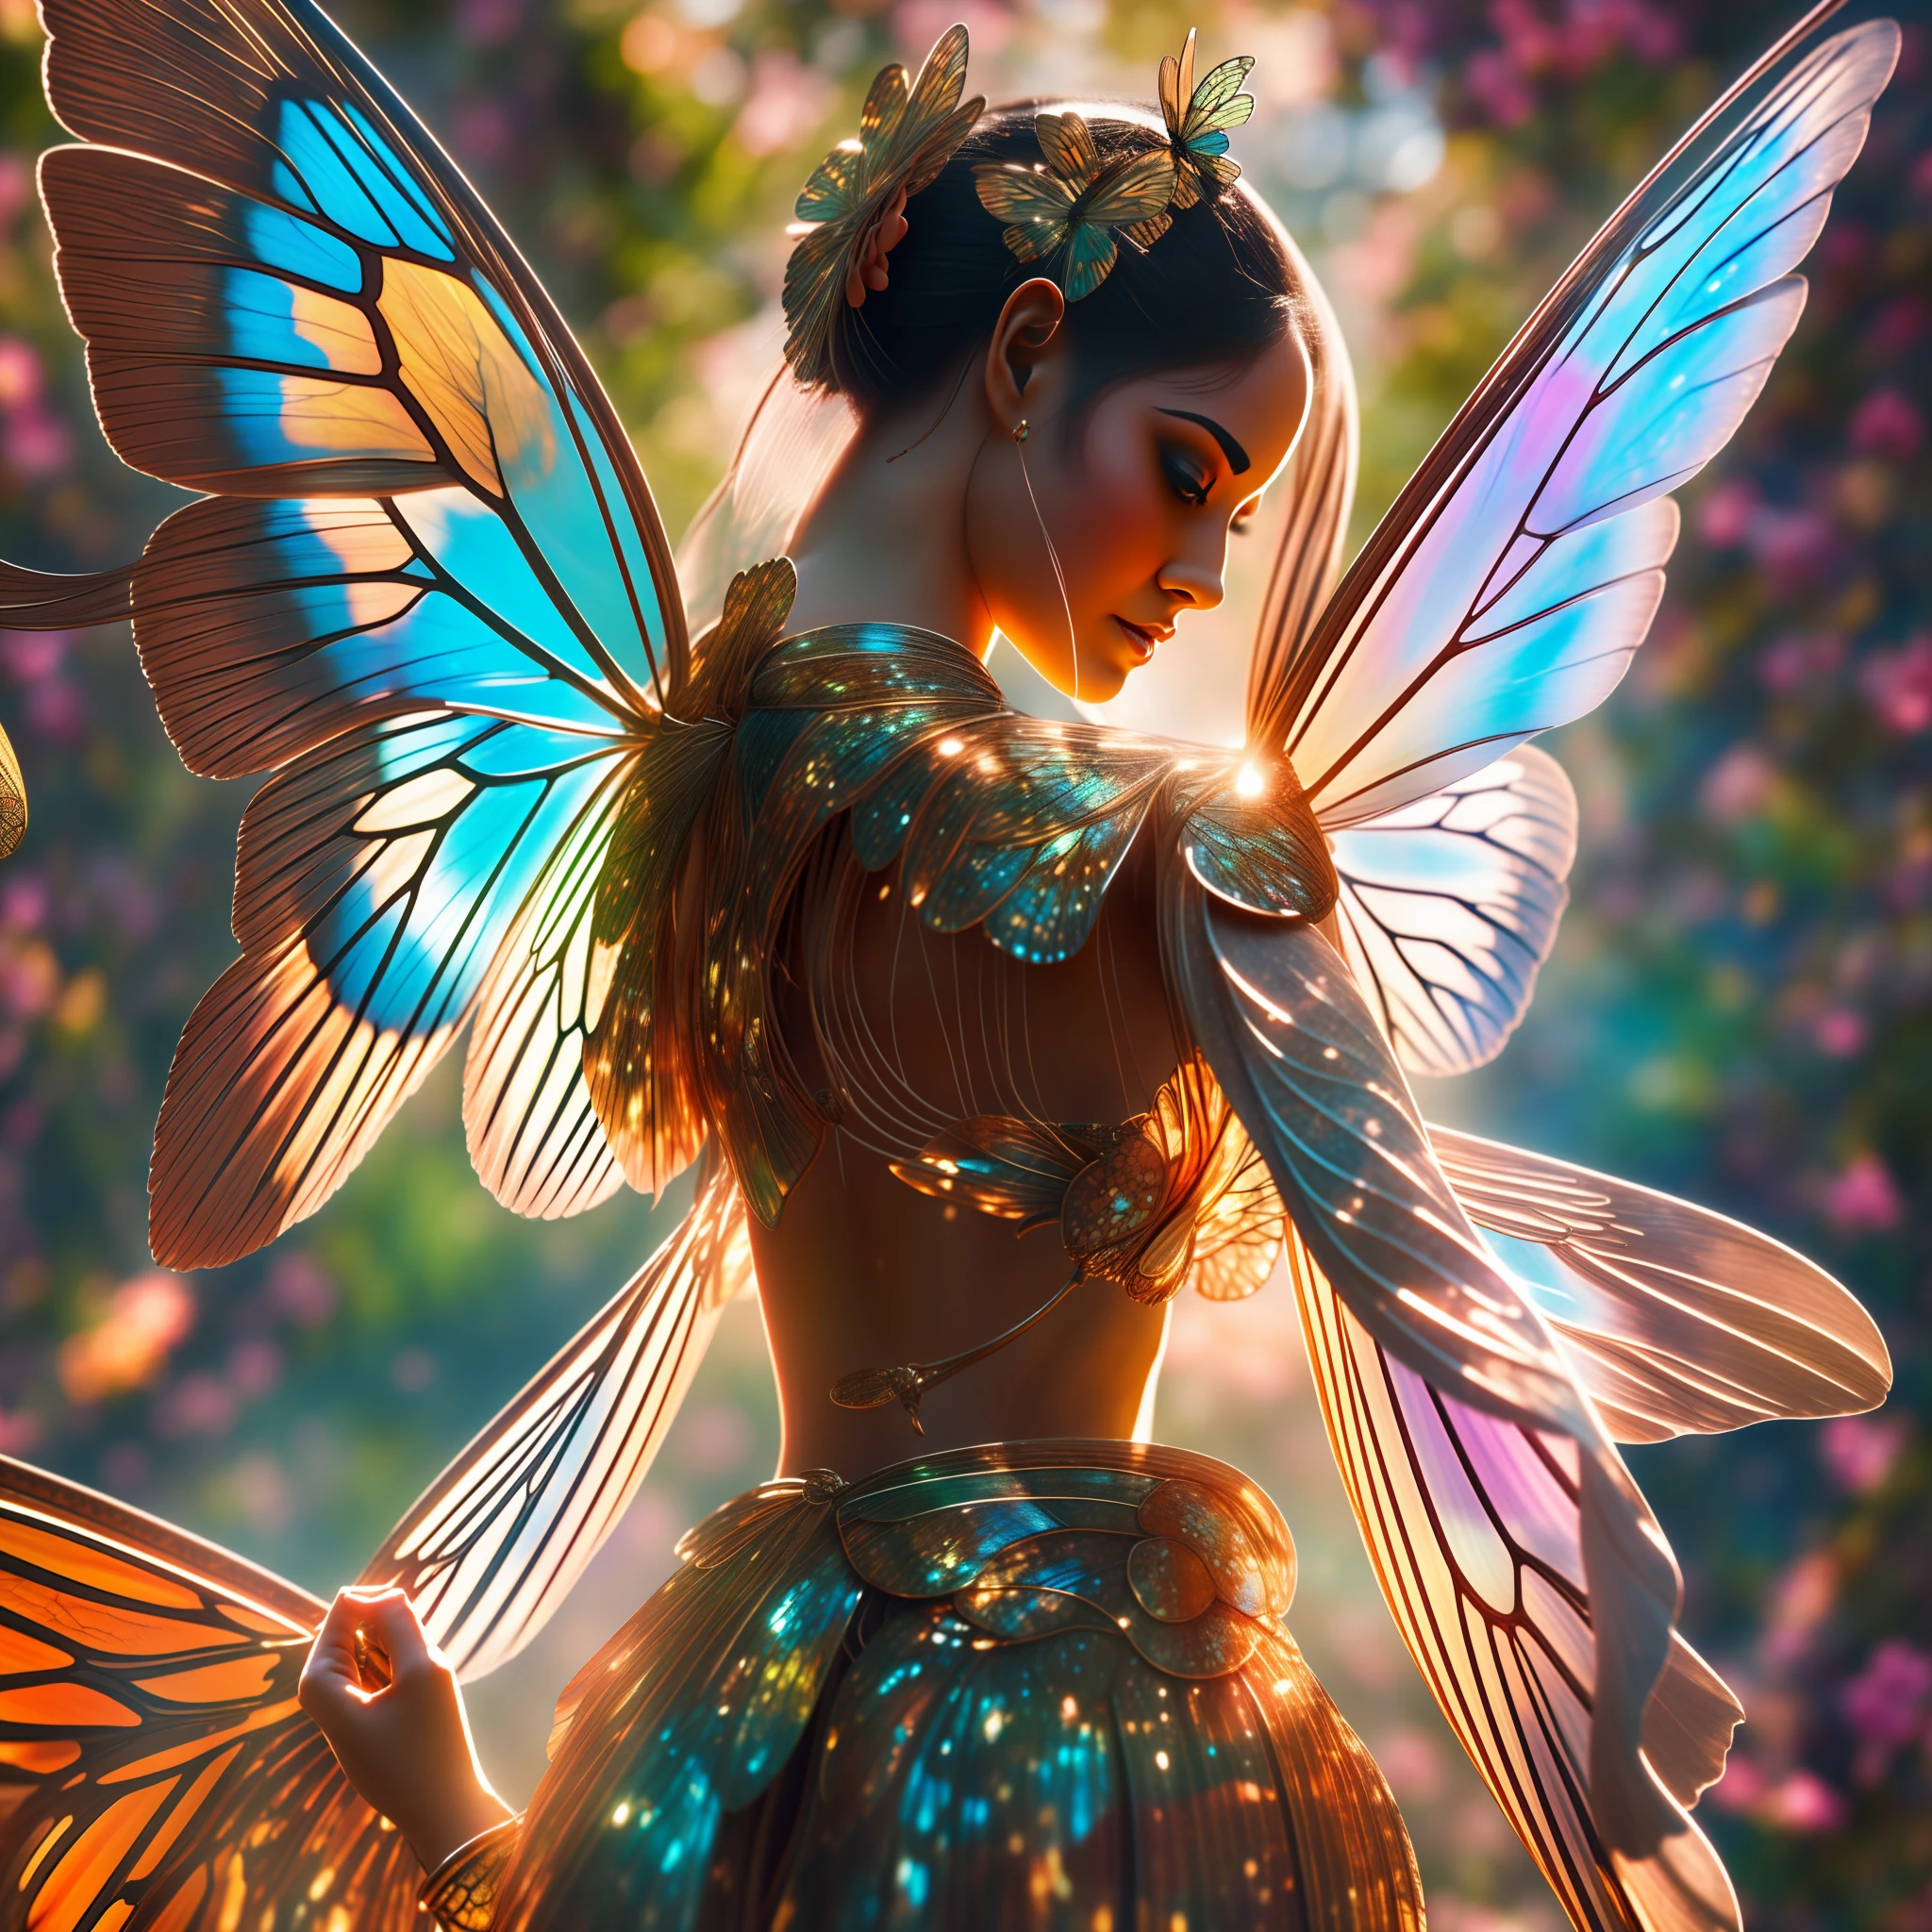 Create an engaging scene in the background of a serene garden, with rich textures. In the center, there is a woman with delicate features, appearing fragile yet exuding remarkable elegance. She is standing, looking upwards, while butterfly wings gracefully unfurl from her back. The image, with an 8K resolution, allows for capturing every detail with extreme clarity and color richness. Carefully represented textures enhance the visual experience. Sunlight bathes the scene, creating a luminous and inspiring context. This image invites the viewer to witness the moment when the woman embraces her transformation and finds  through butterfly wings.